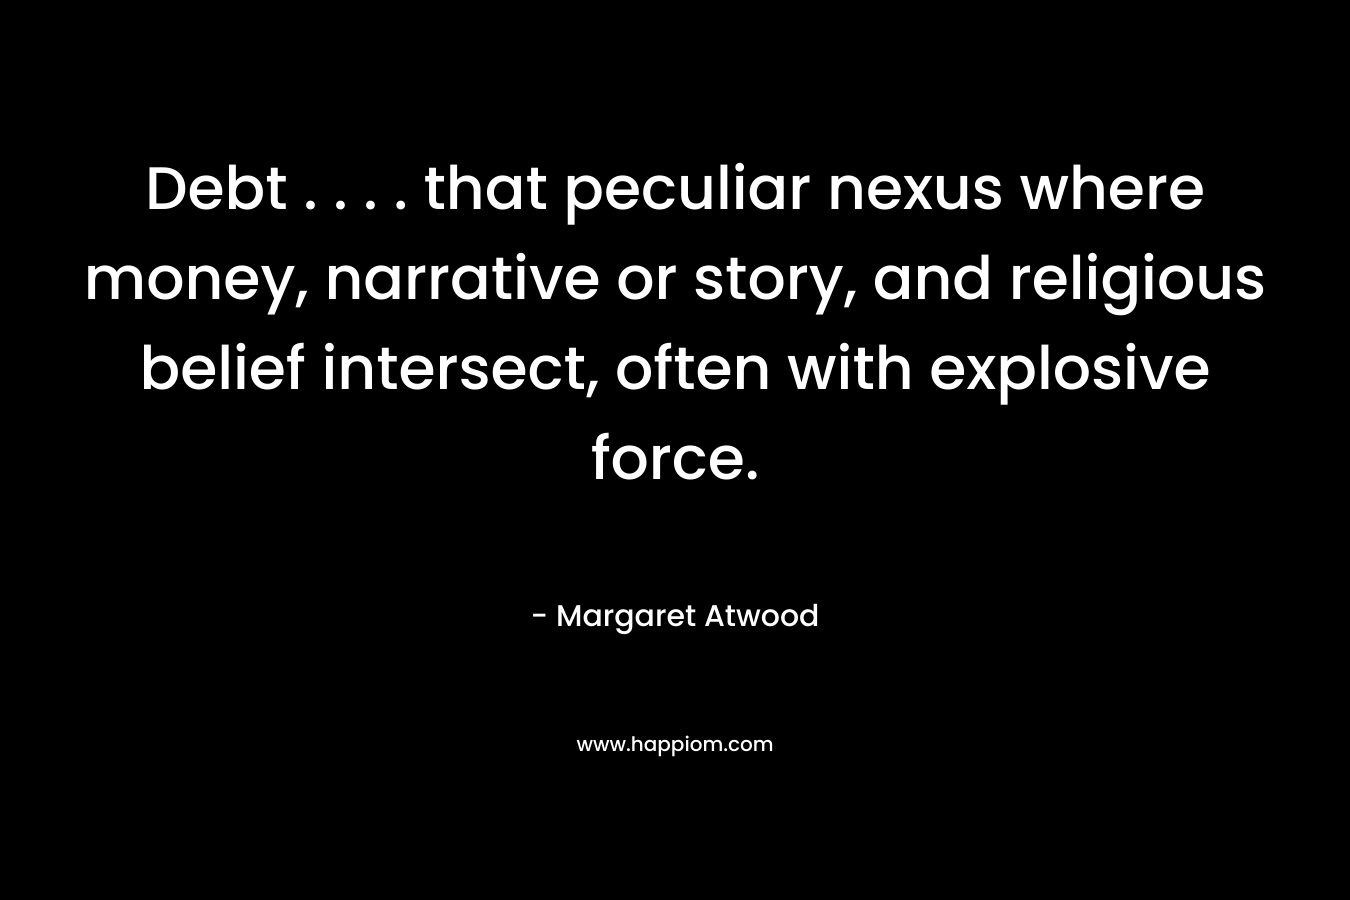 Debt . . . . that peculiar nexus where money, narrative or story, and religious belief intersect, often with explosive force. – Margaret Atwood